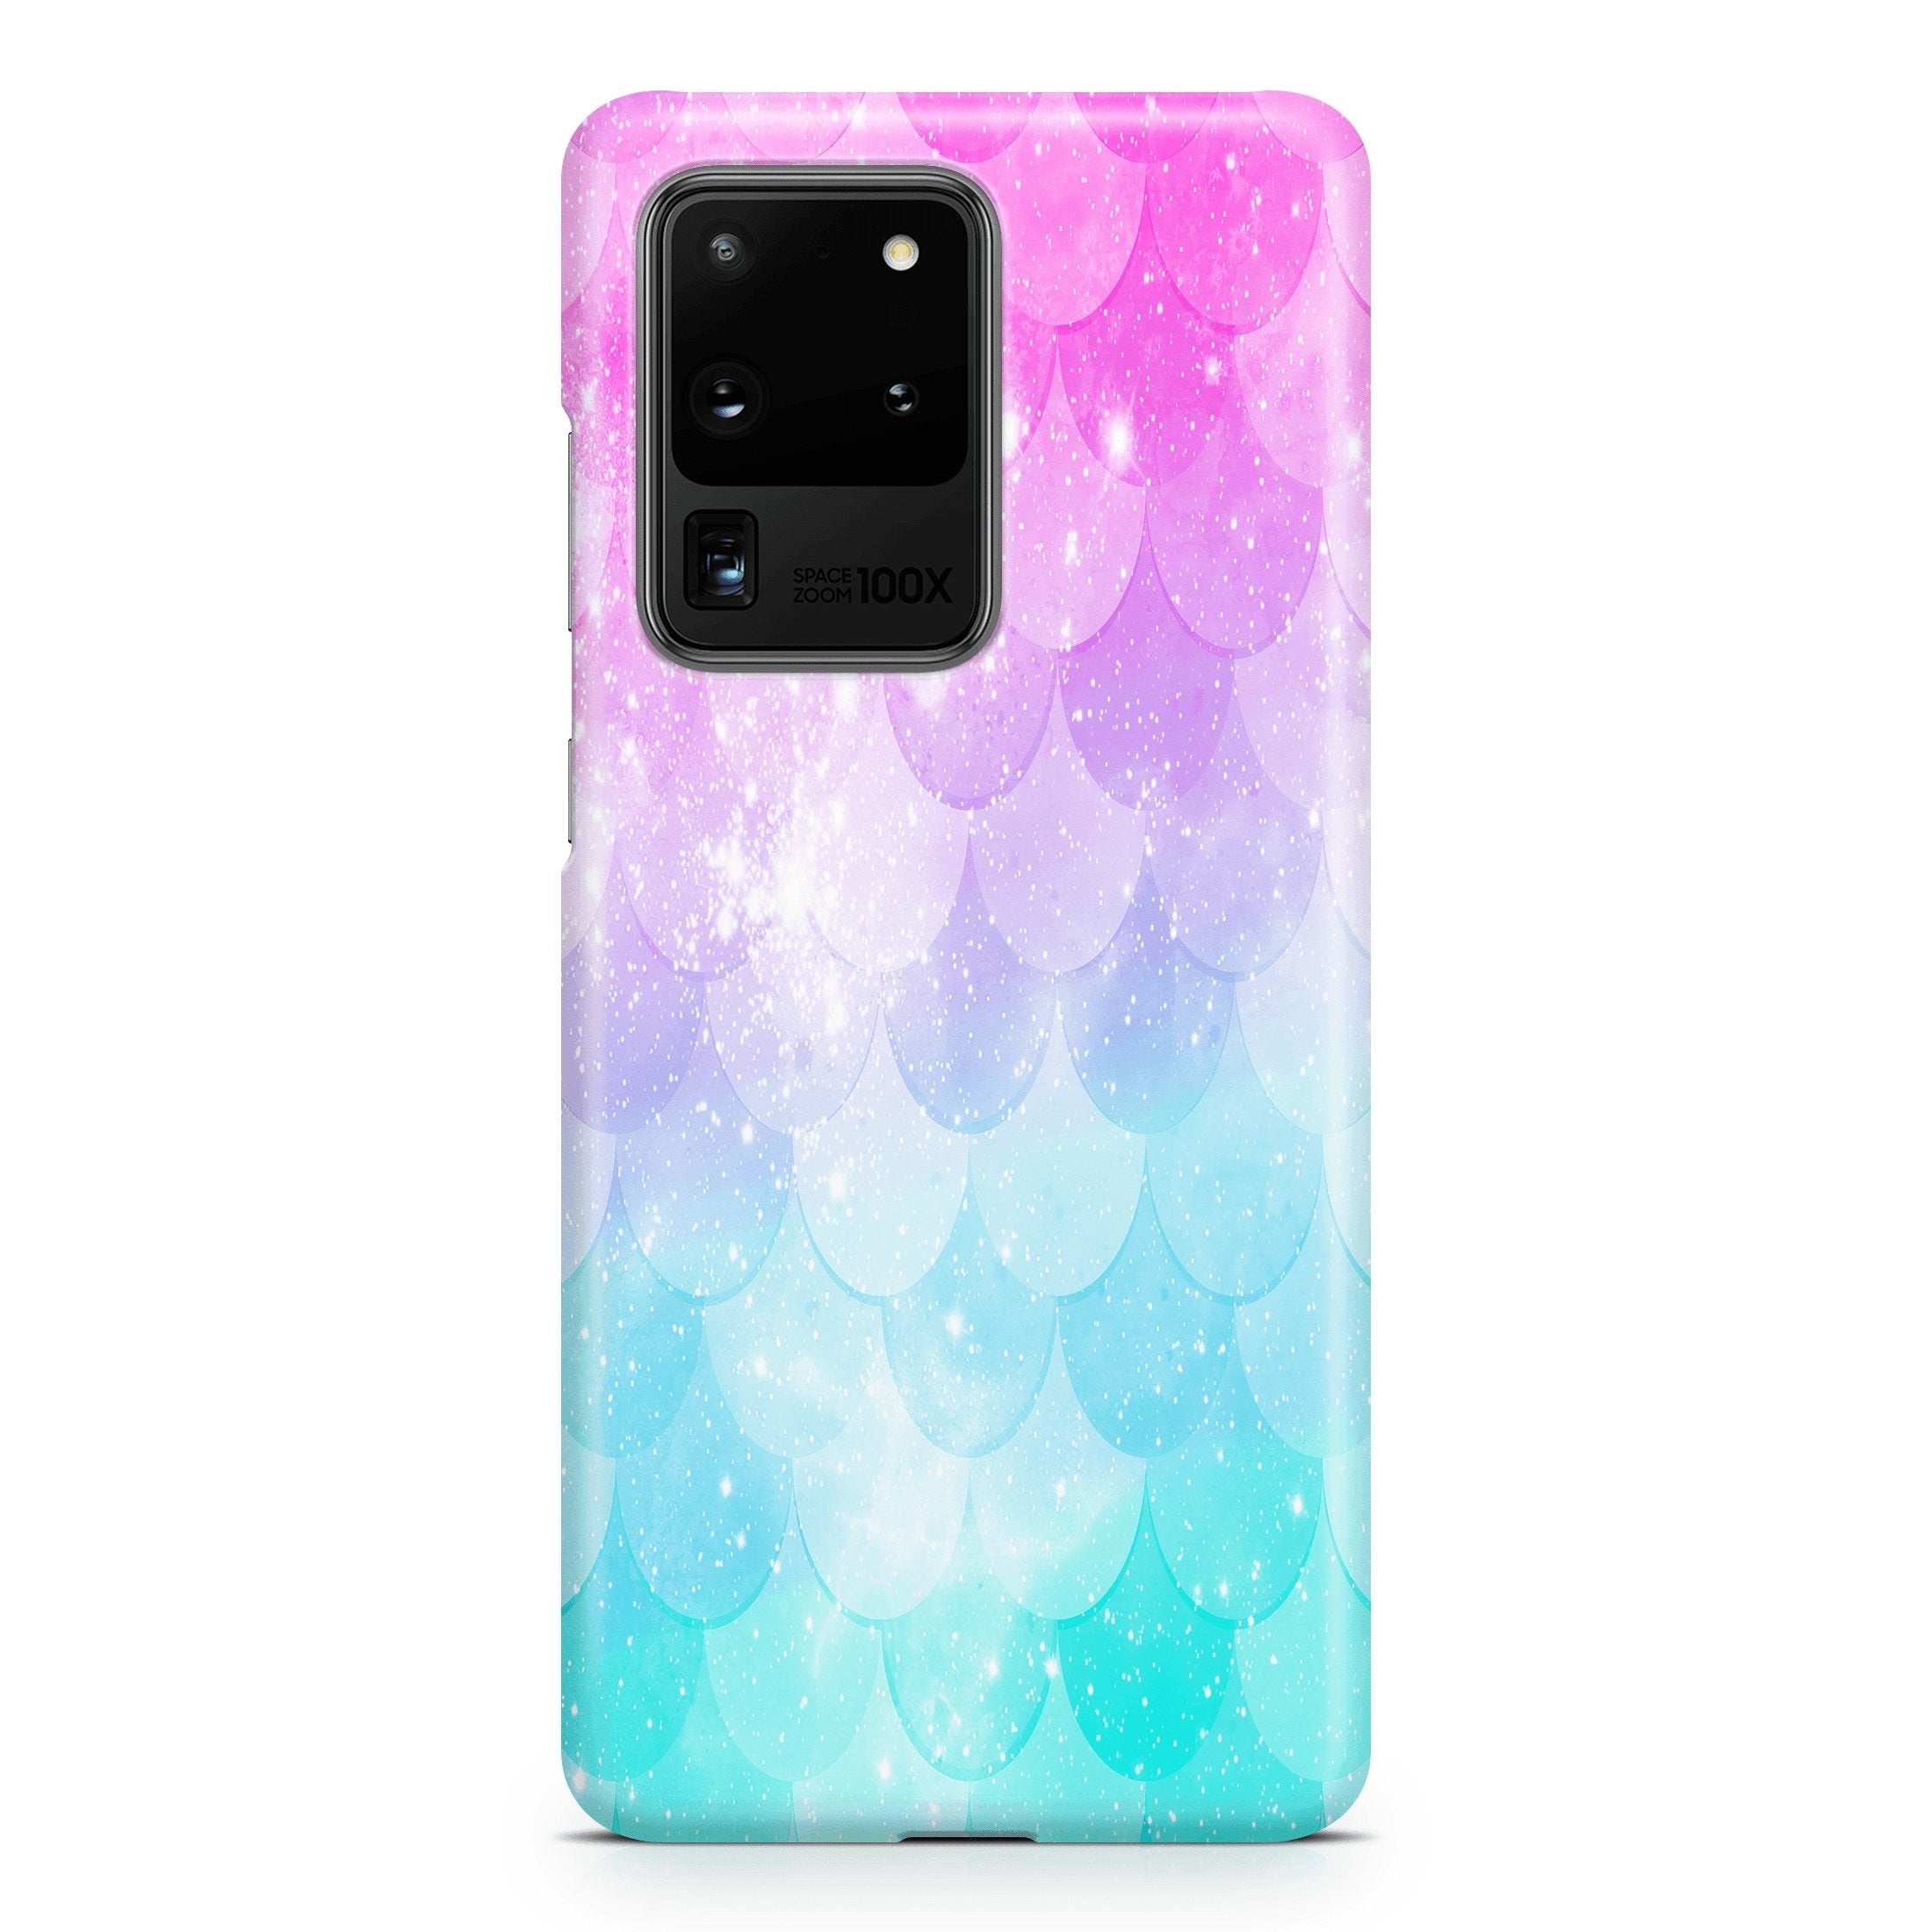 Rainbow Mermaid Scale - Samsung phone case designs by CaseSwagger